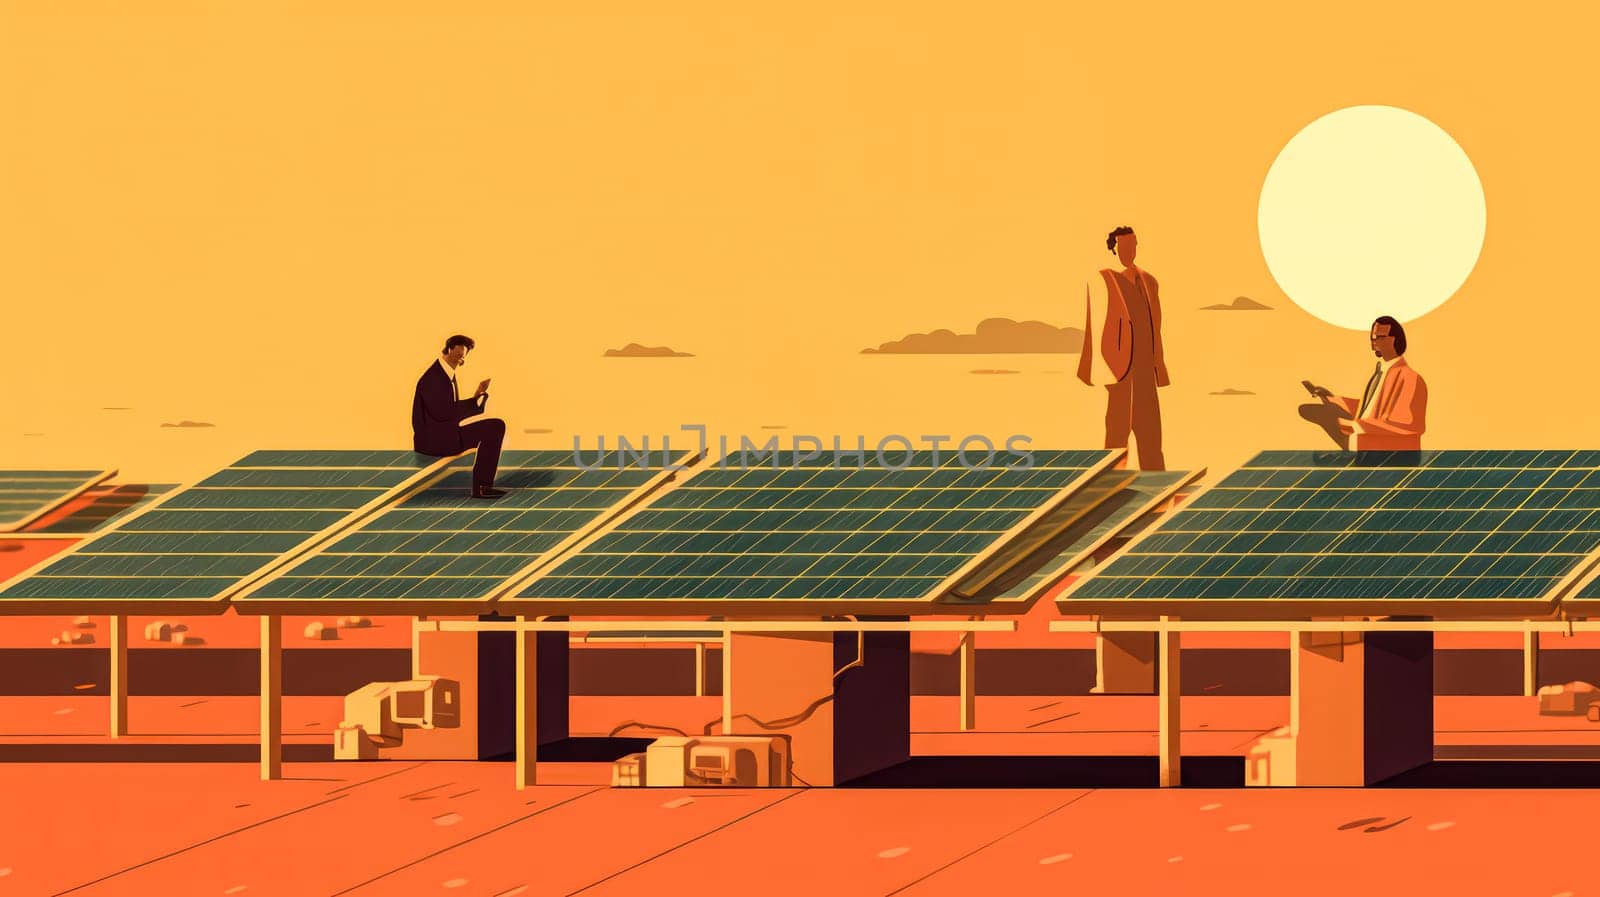 Isometric illustration of a solar cell power plant maintenance team working on the roof of a house. Standard visual depicting solar energy maintenance.